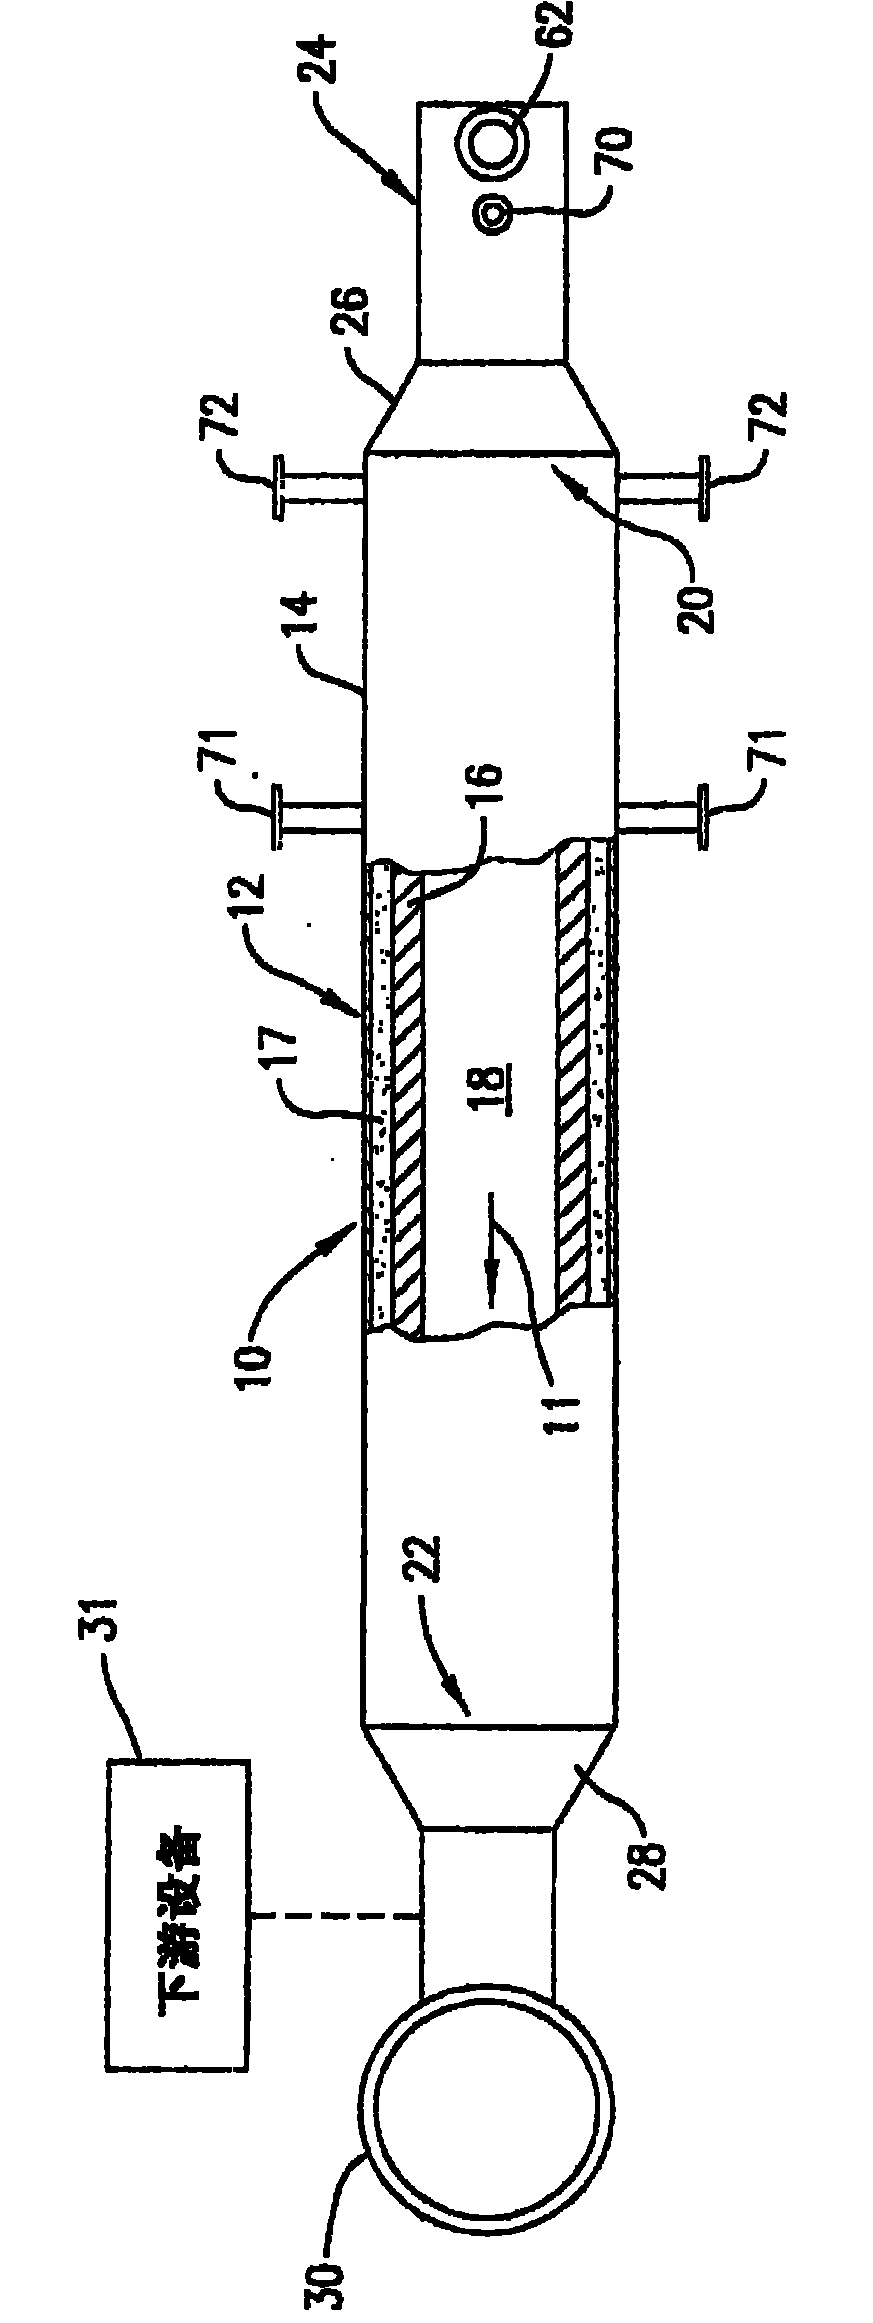 Flameless thermal oxidation apparatus and methods